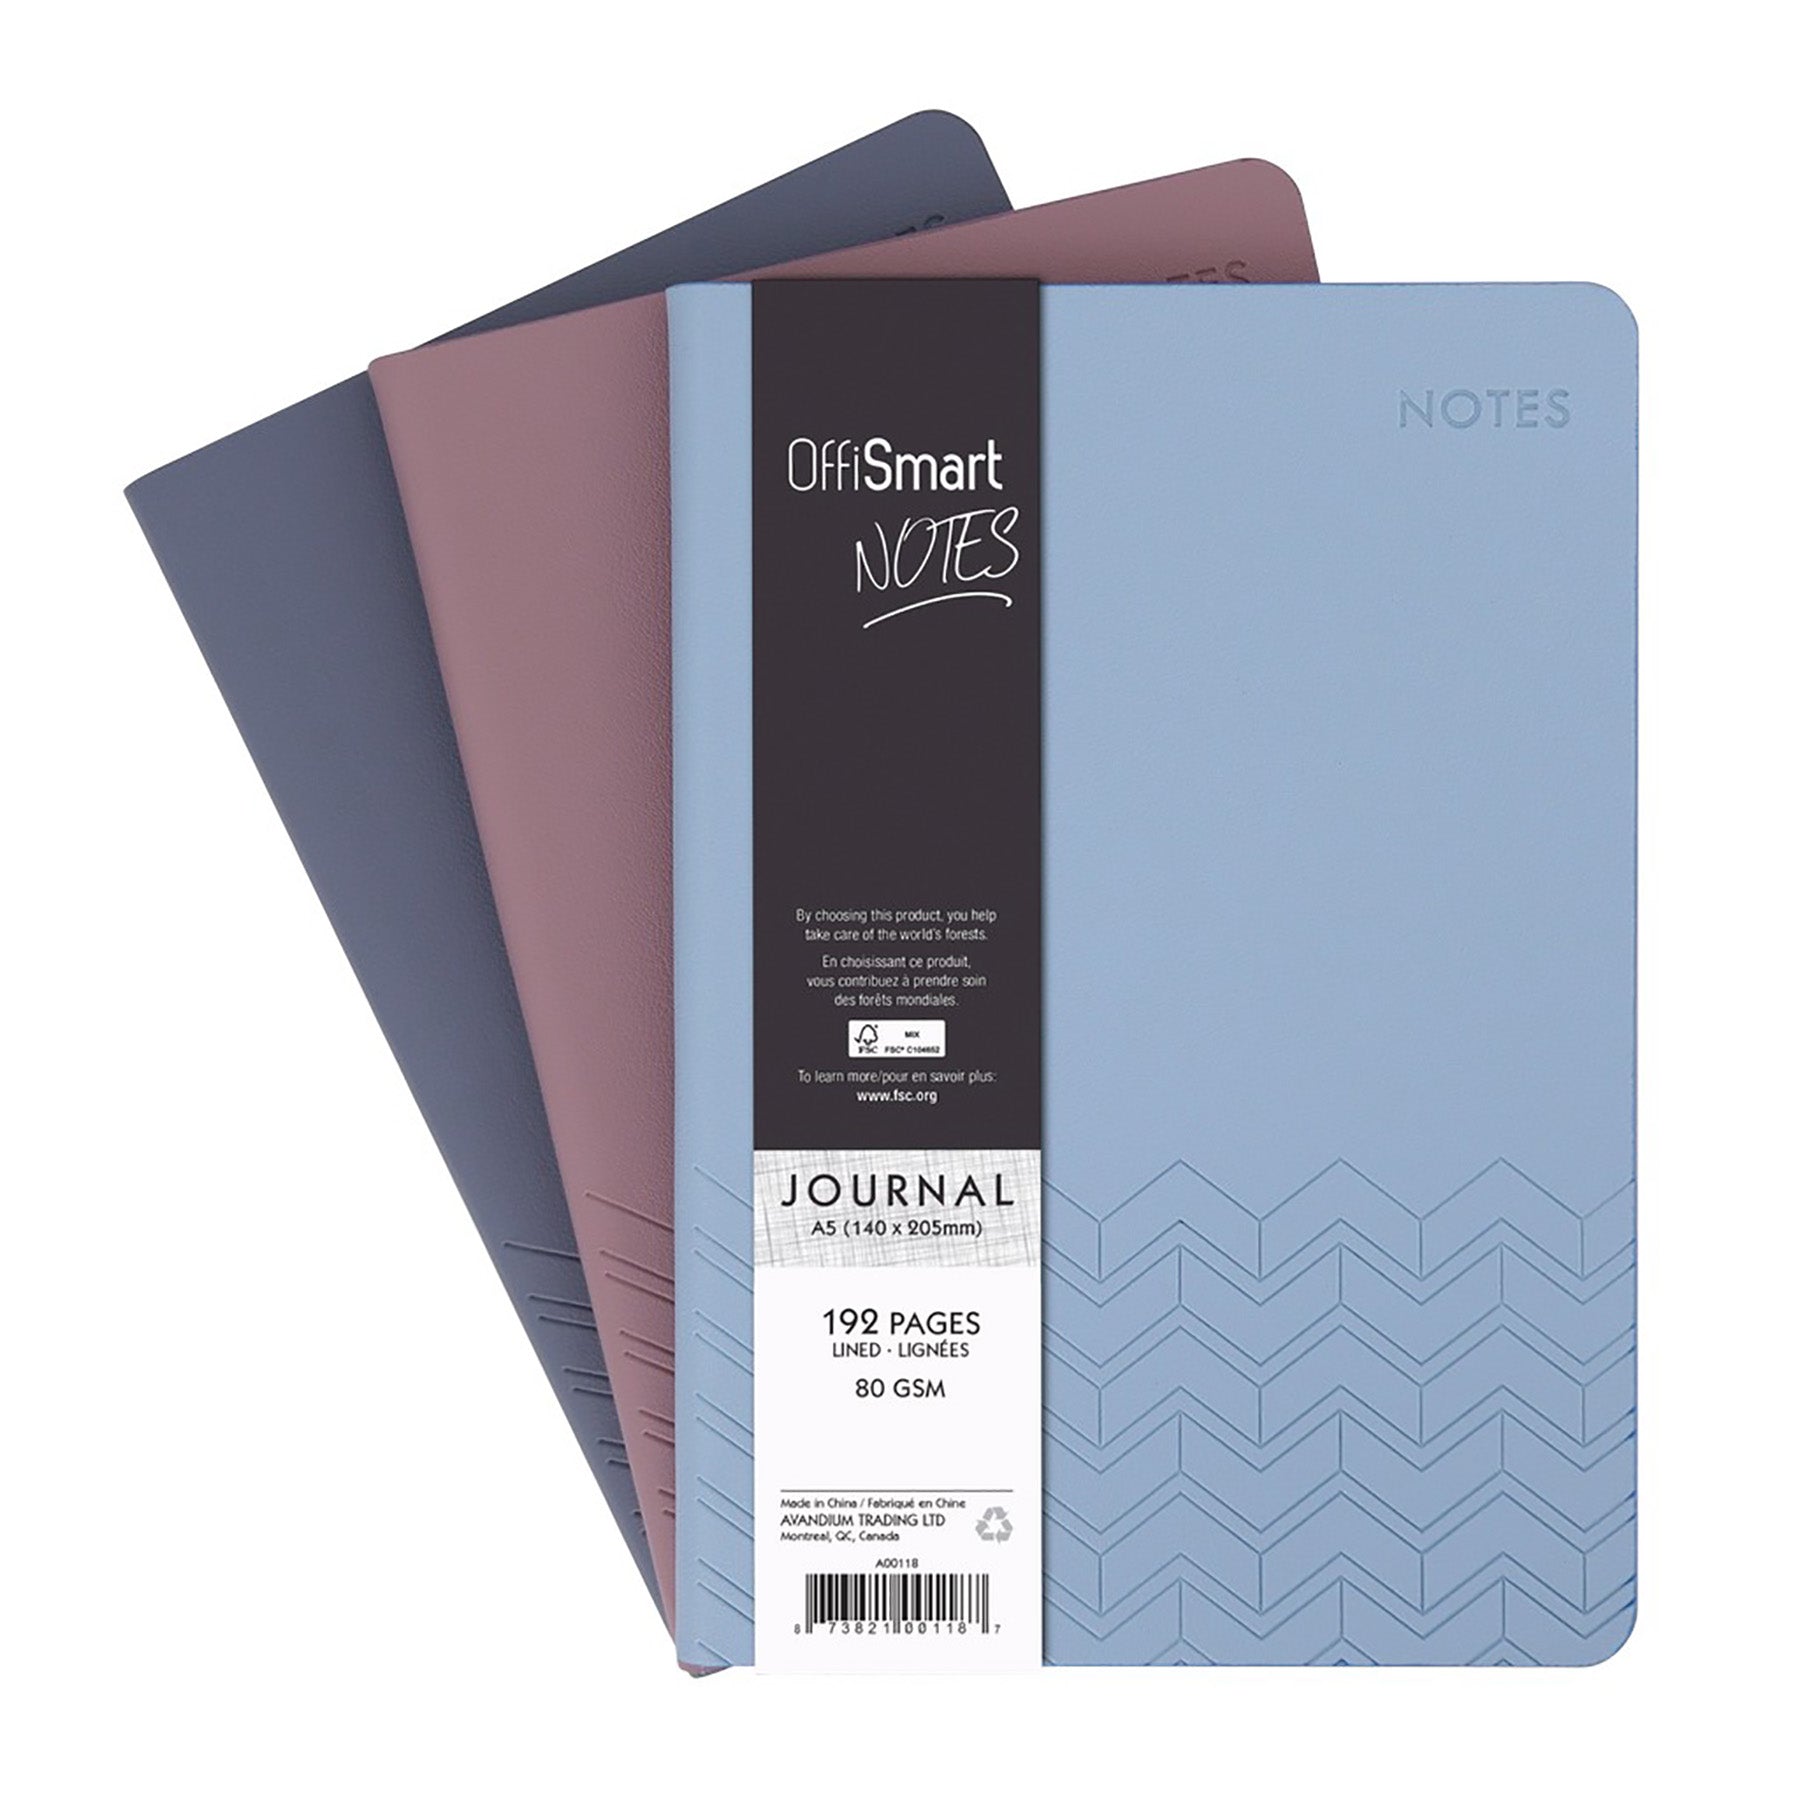 Offismart Soft-Touch Leatherette Notebook A5 192 Lined Pages 5.8x8.3in